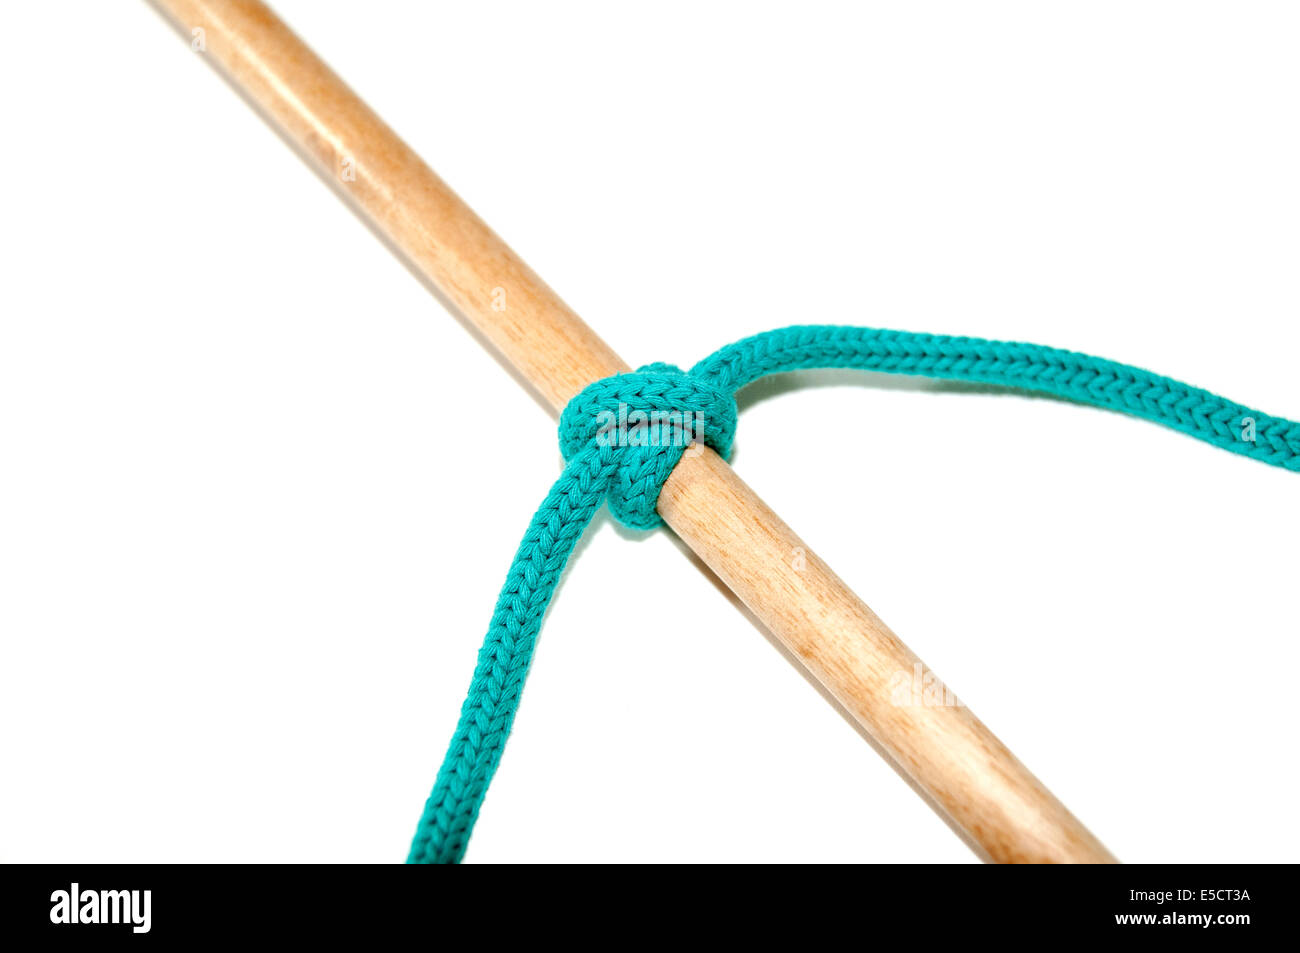 Clove hitch knot on white background Stock Photo